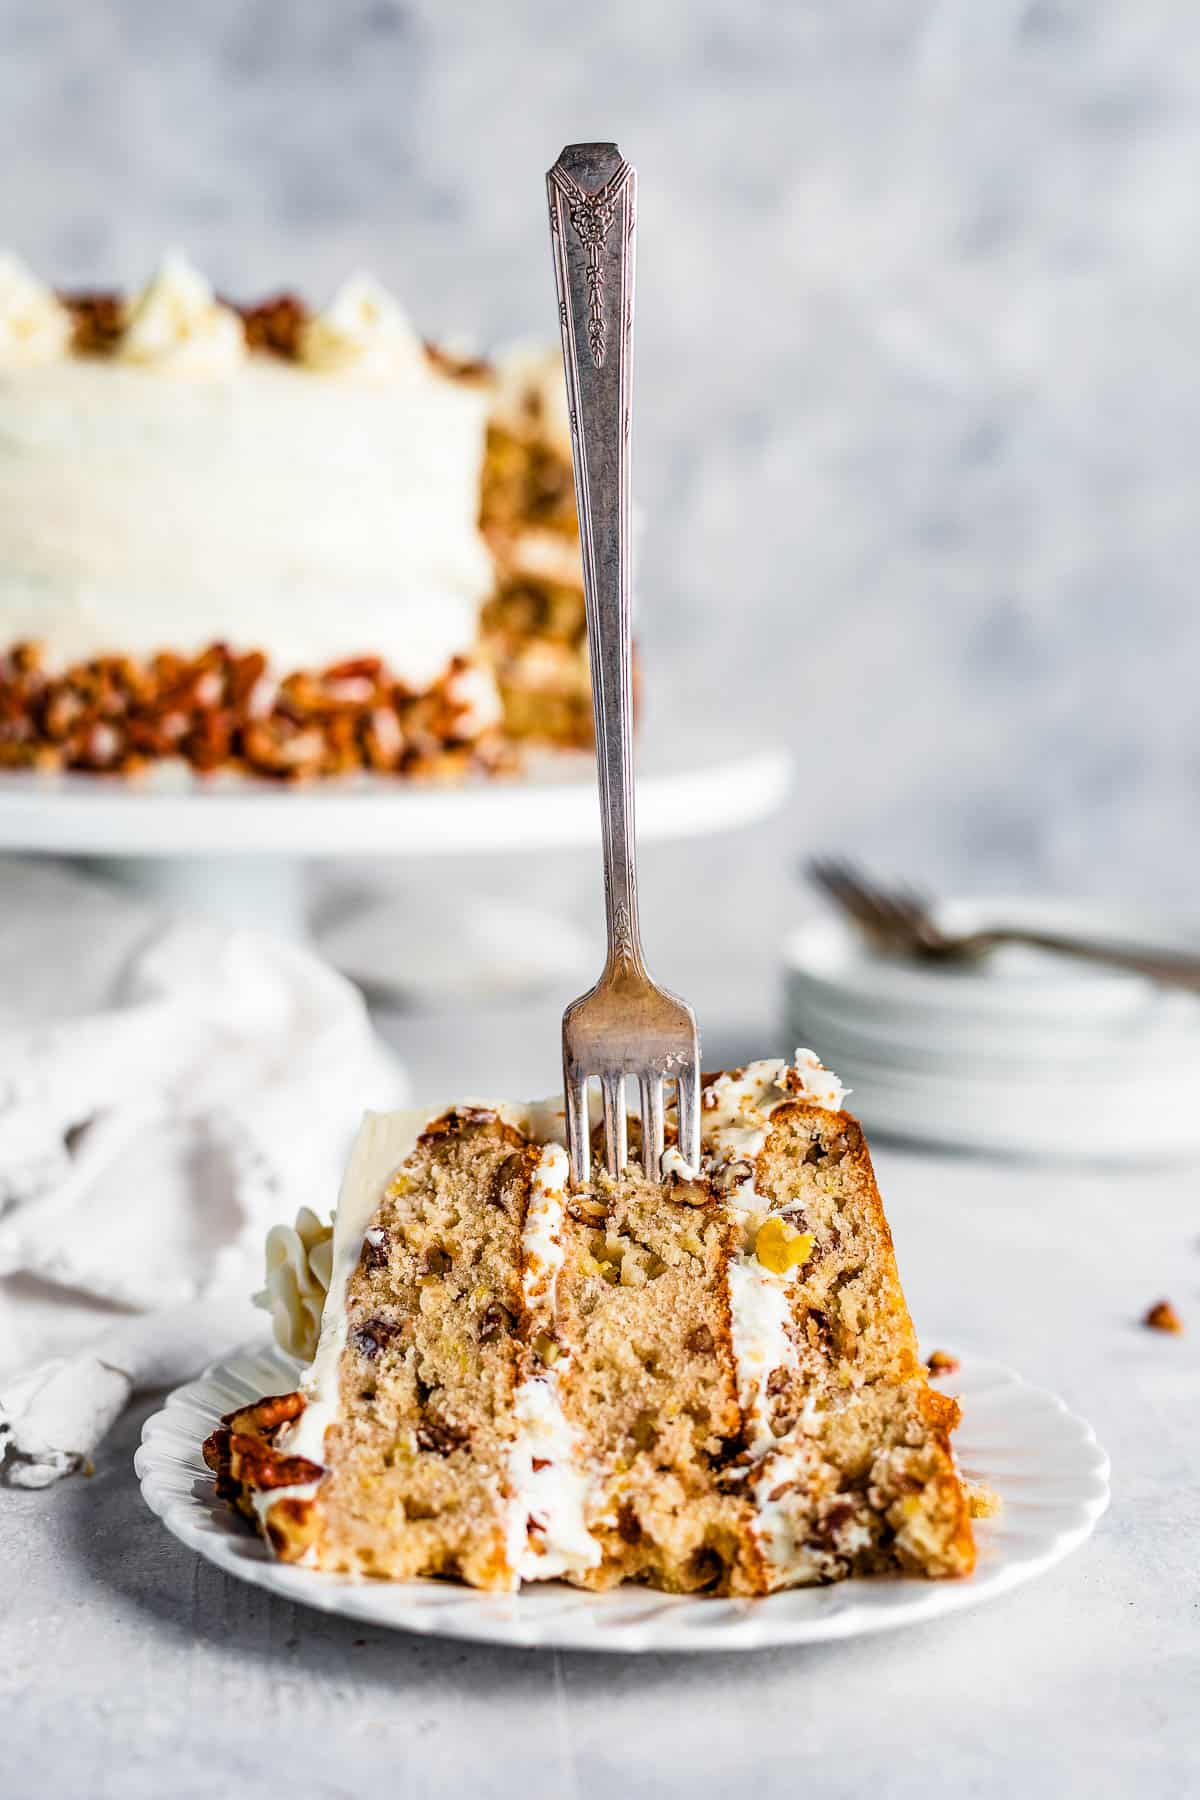 A Piece of Hummingbird Cake with a Metal Fork Stuck Into it